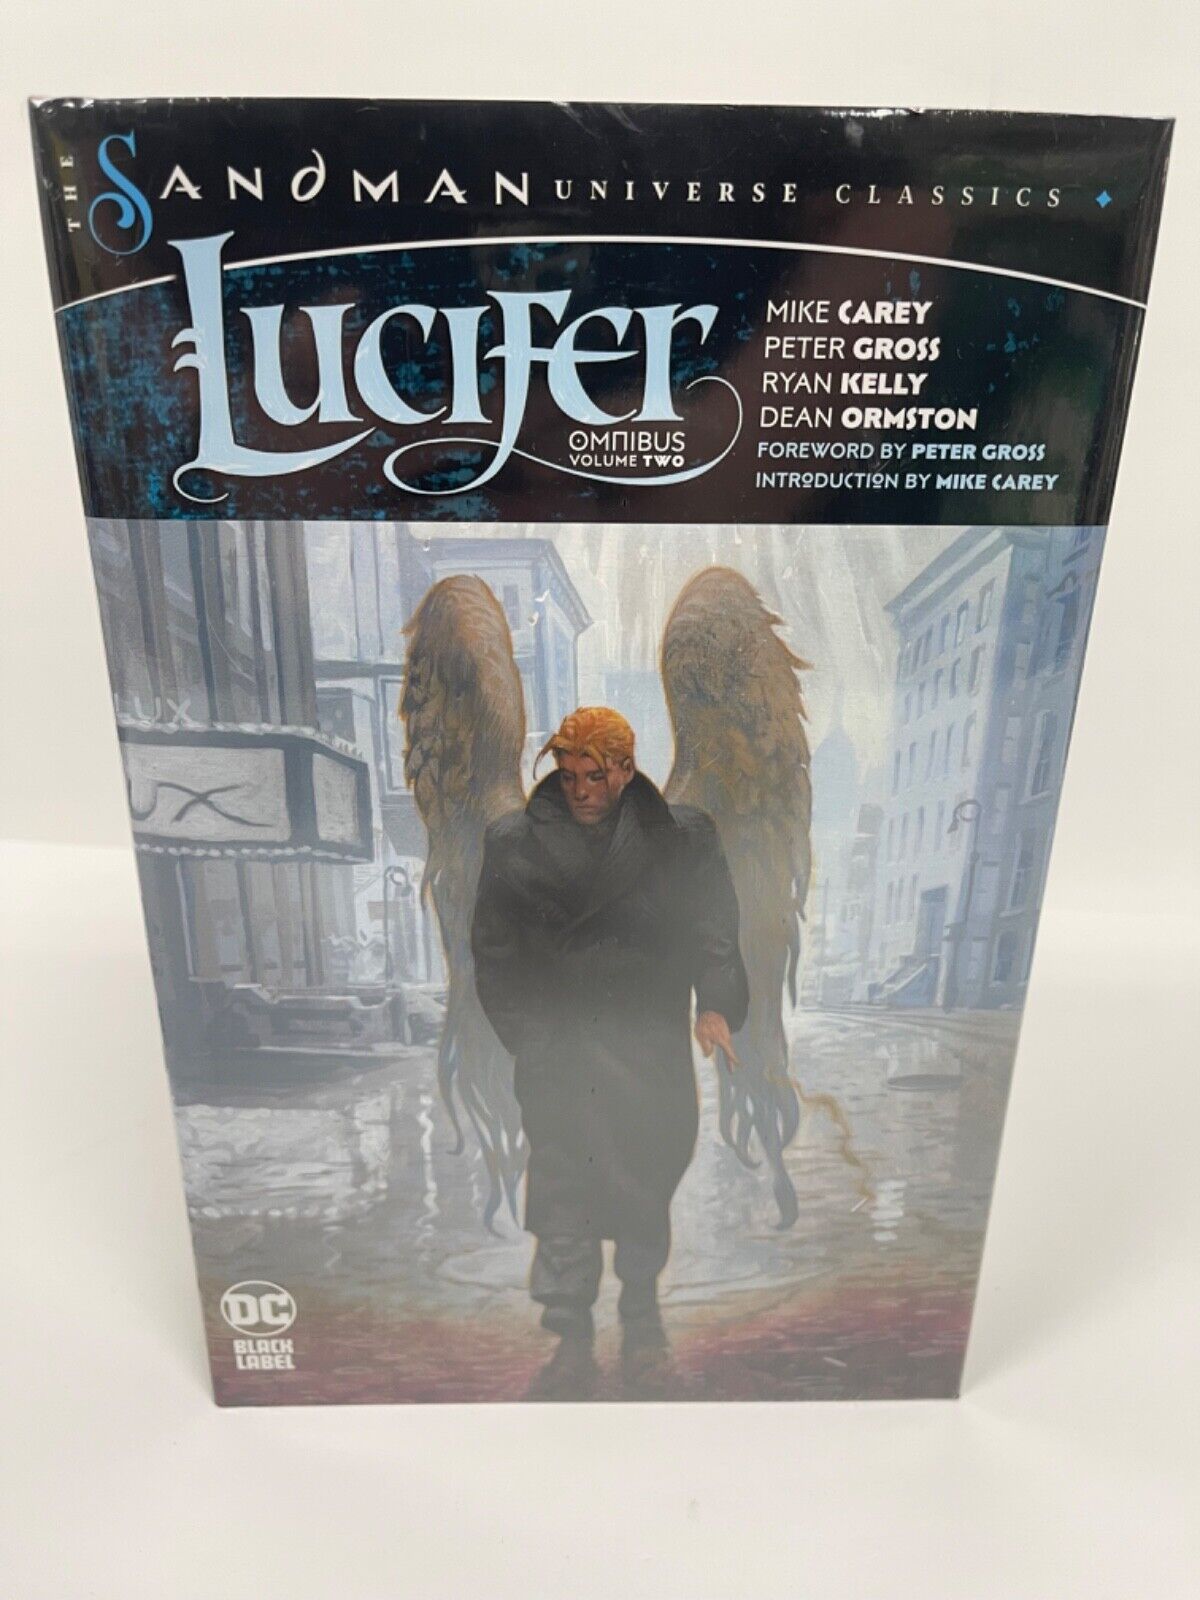 Lucifer Omnibus Vol 2 Collects #36-75 Hardcover HC DC Comics New Sealed $125 